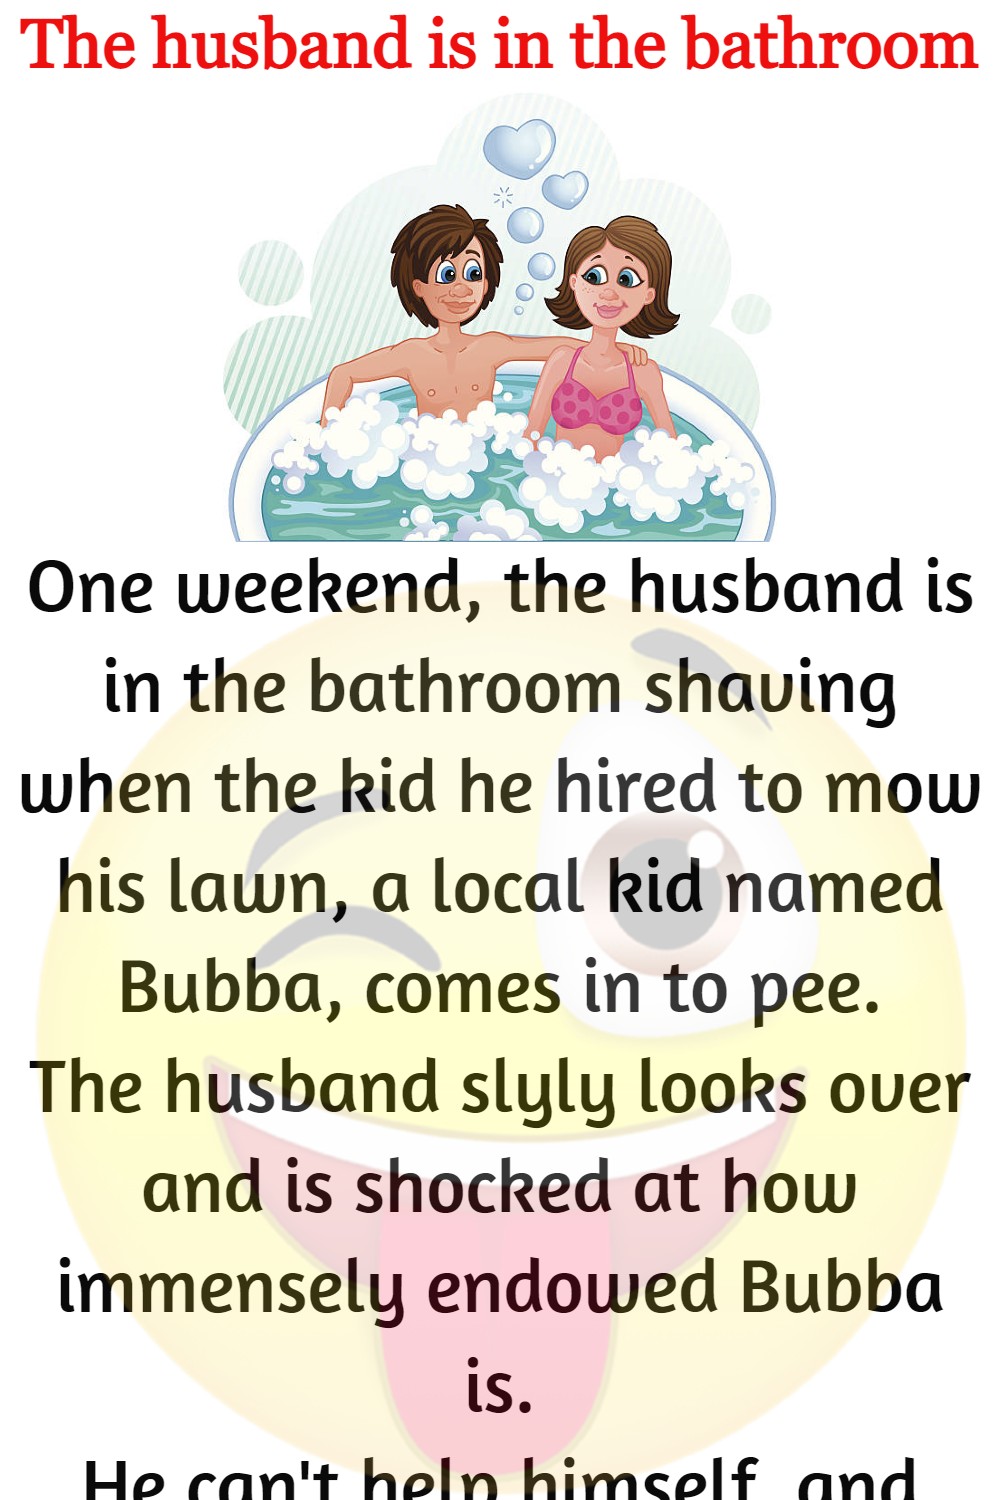 The husband is in the bathroom